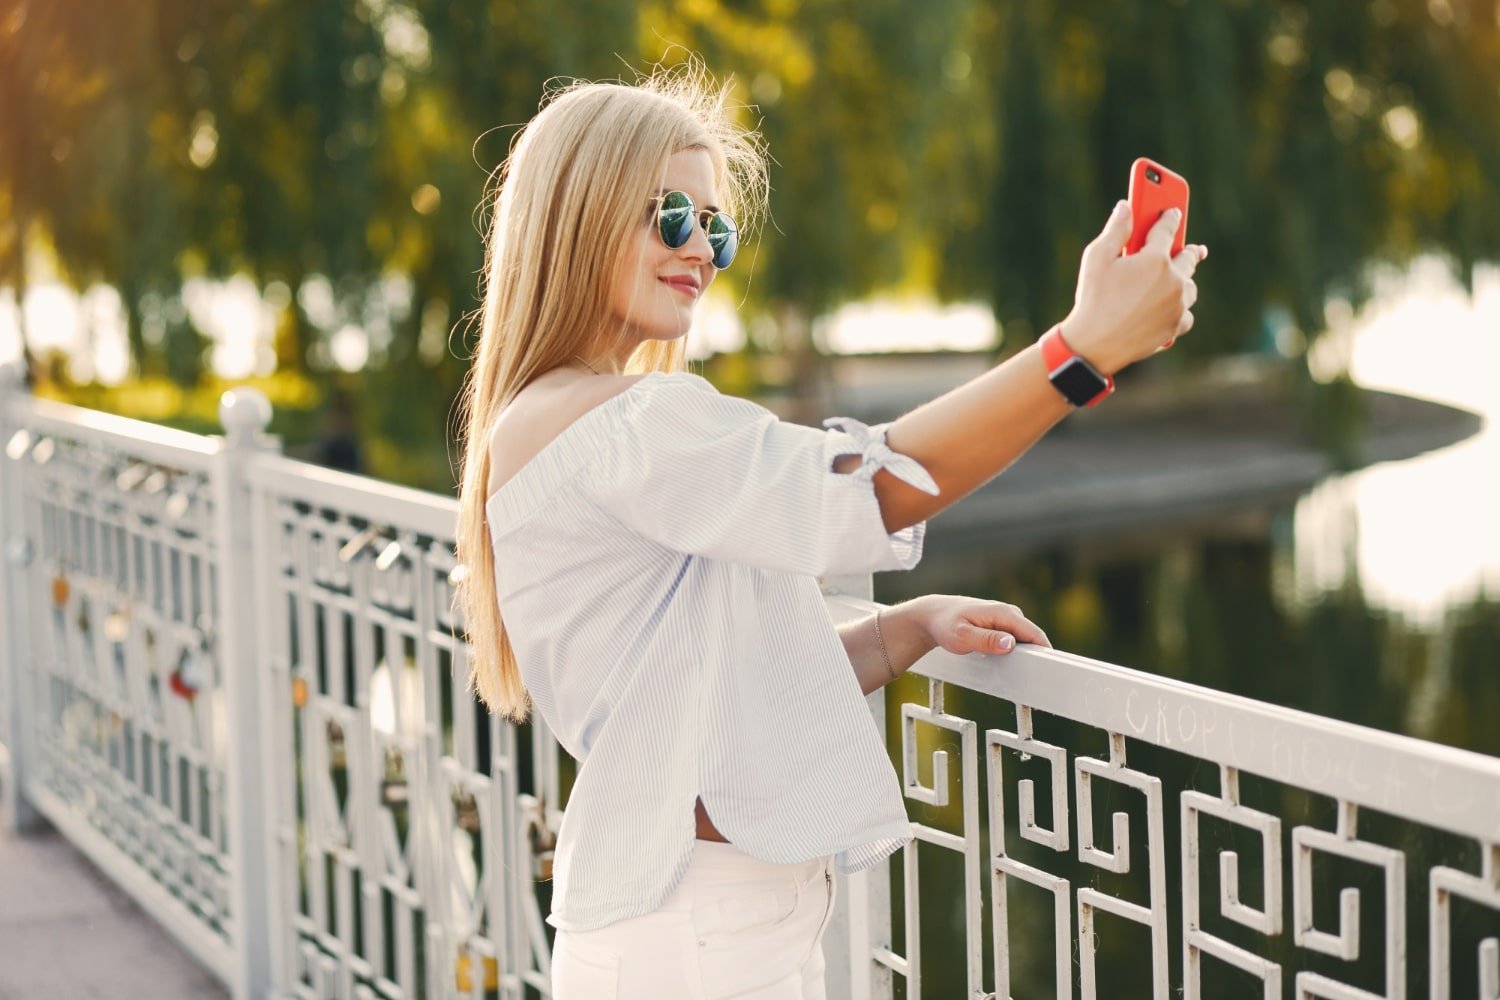 BURGA: Elevate Your Tech Style with Fashion-Forward Phone Cases